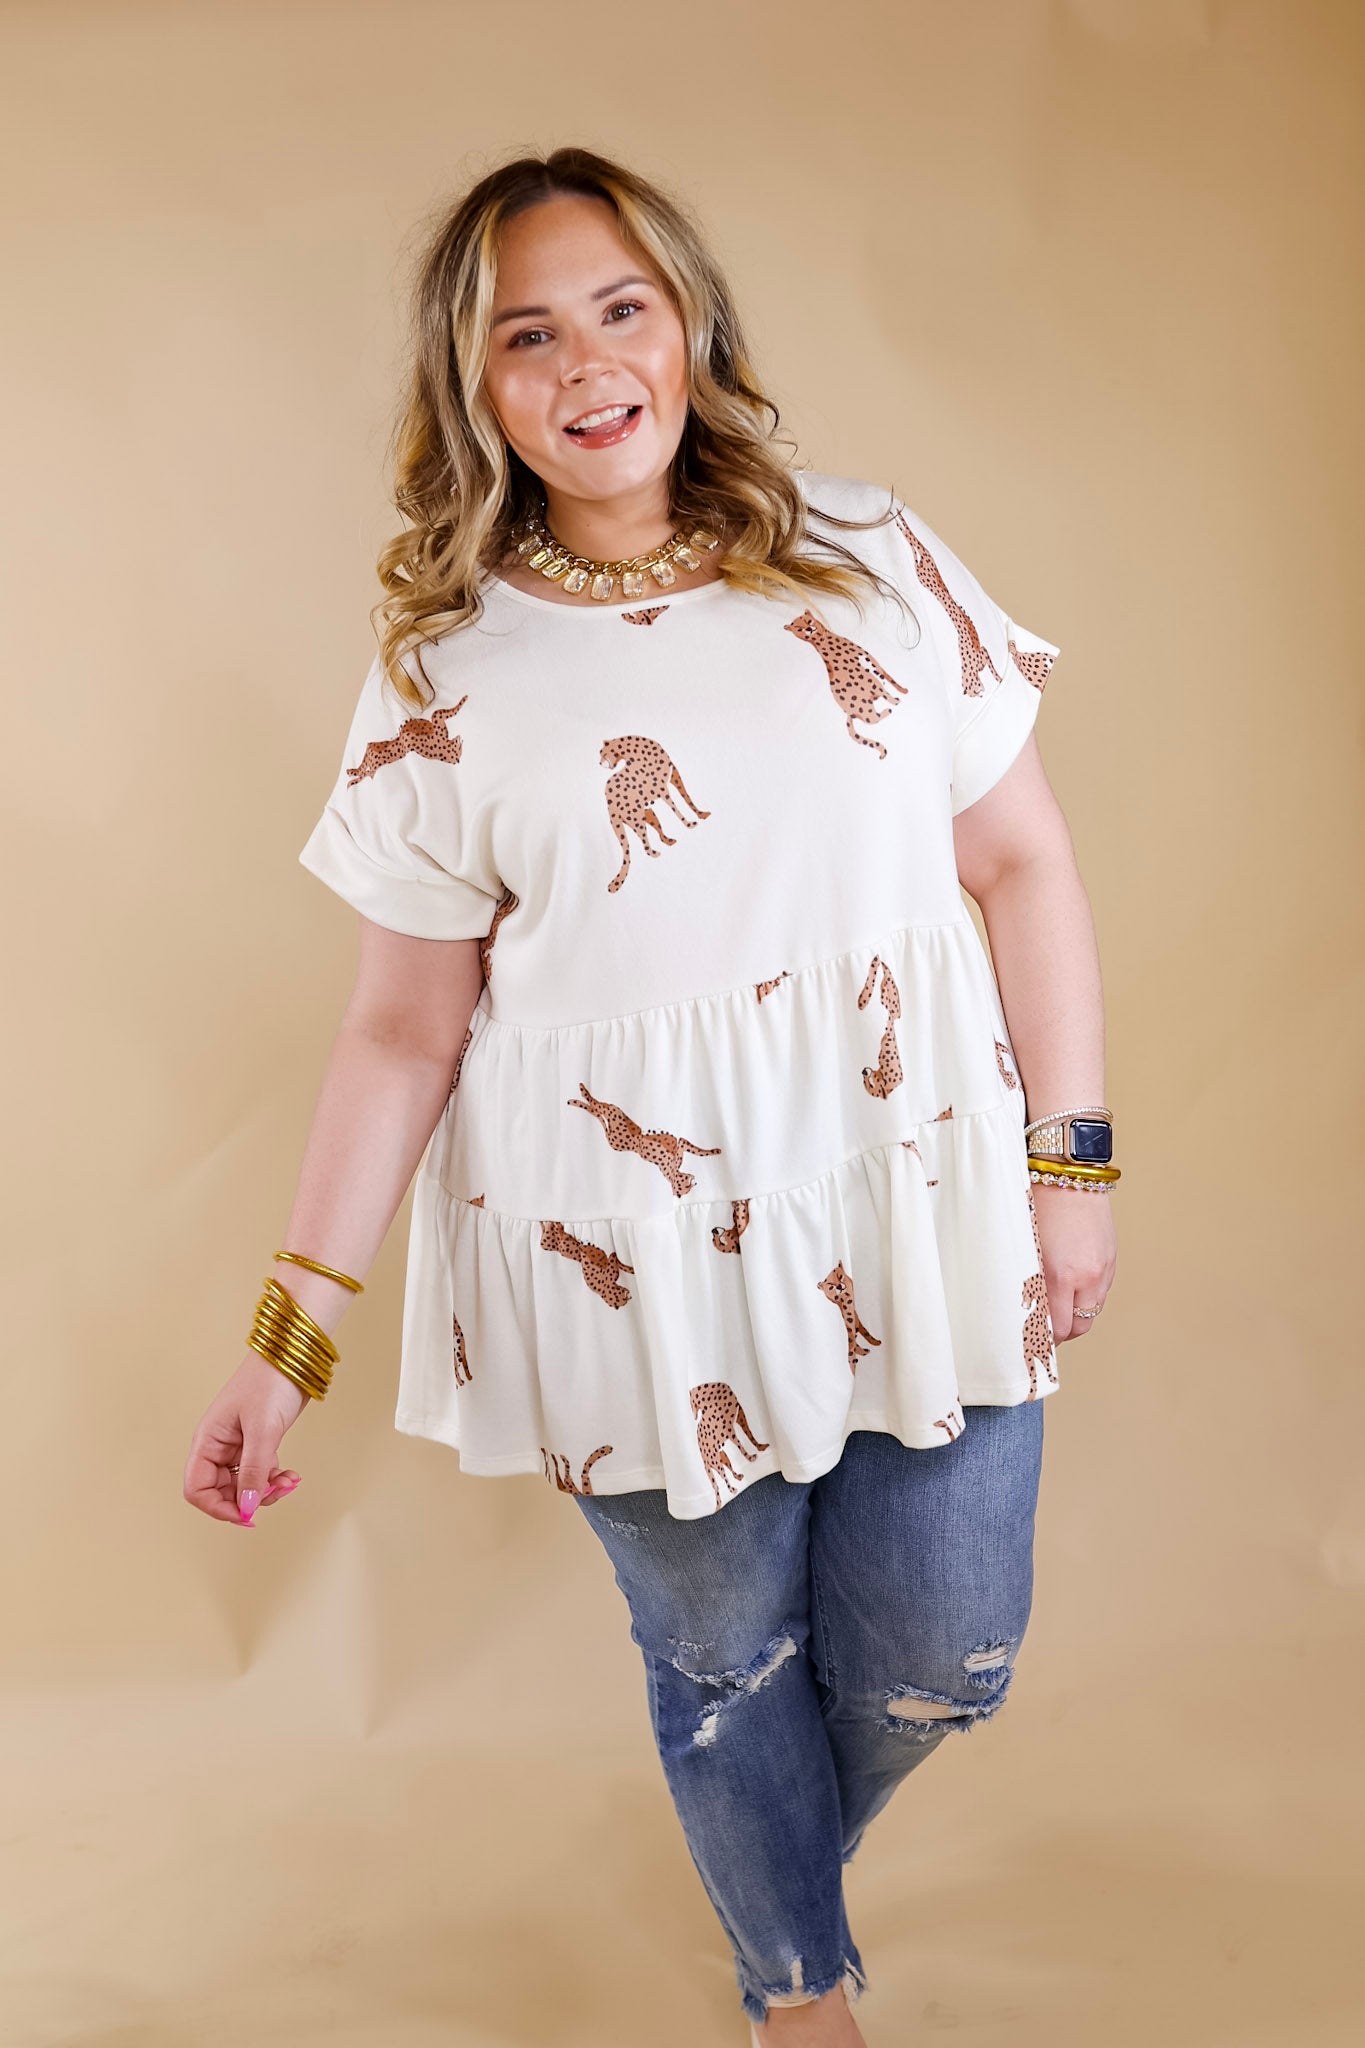 Feeling Wild Cheetah Print Tiered Babydoll Top in Ivory - Giddy Up Glamour Boutique